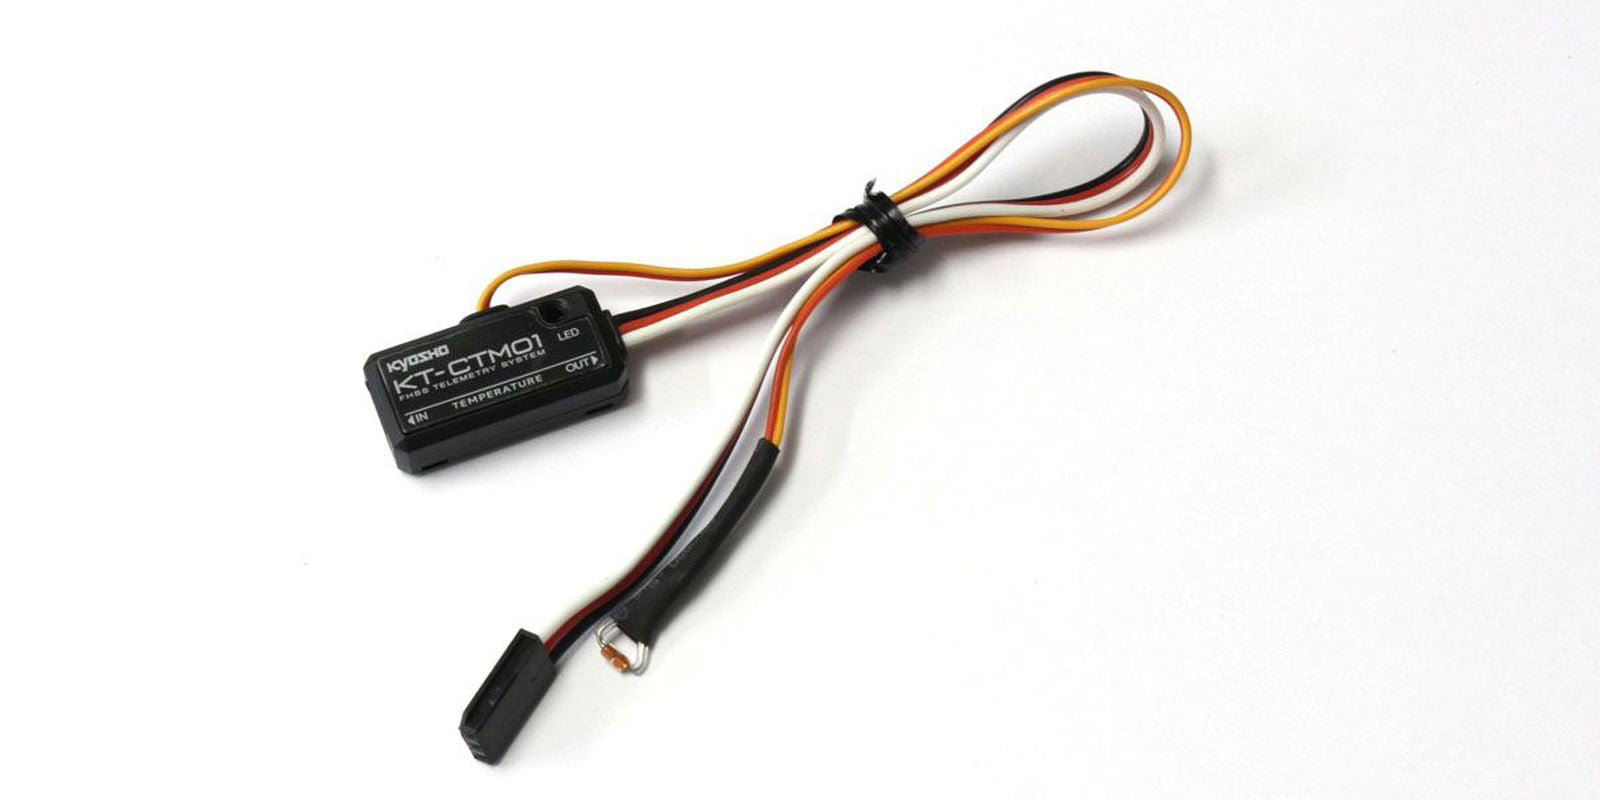 Kyosho 82137-2 Thermo sensor (for Syncro KR-431T) - BanzaiHobby